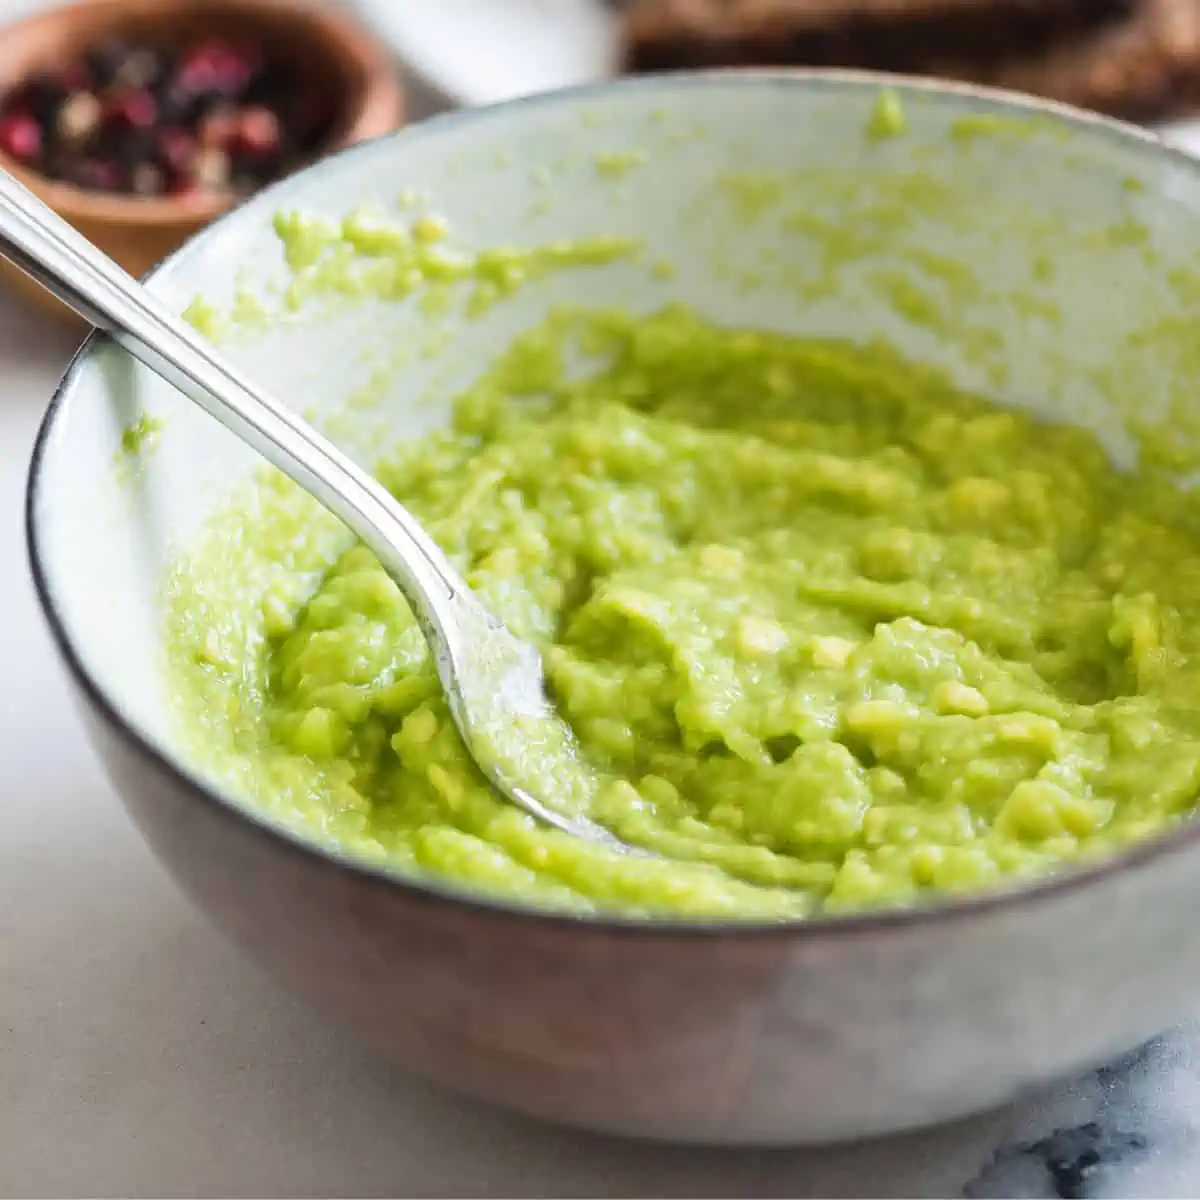 Mashed avocado in bowl with fork.
